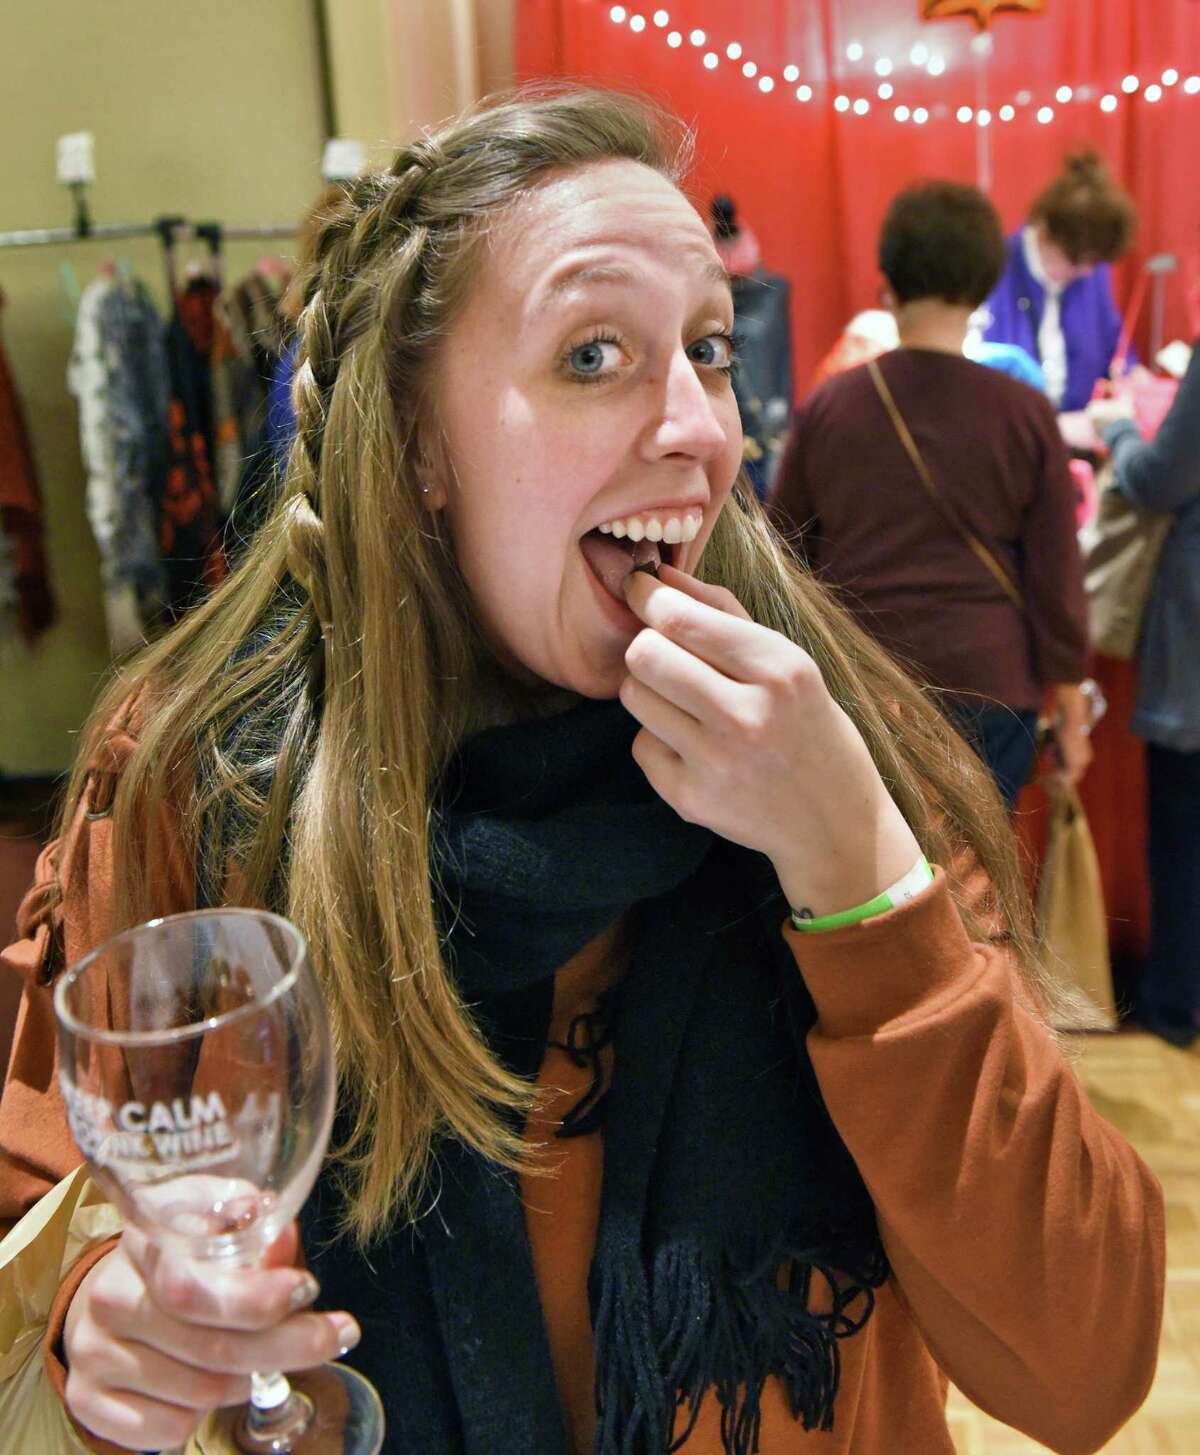 Emily Pierce of Albany sample a Goufrais or German "Cool Treat" from Angelic Imports during the Albany Wine & Chocolate Festival Saturday March 18, 2017 in Colonie, NY. (John Carl D'Annibale / Times Union)